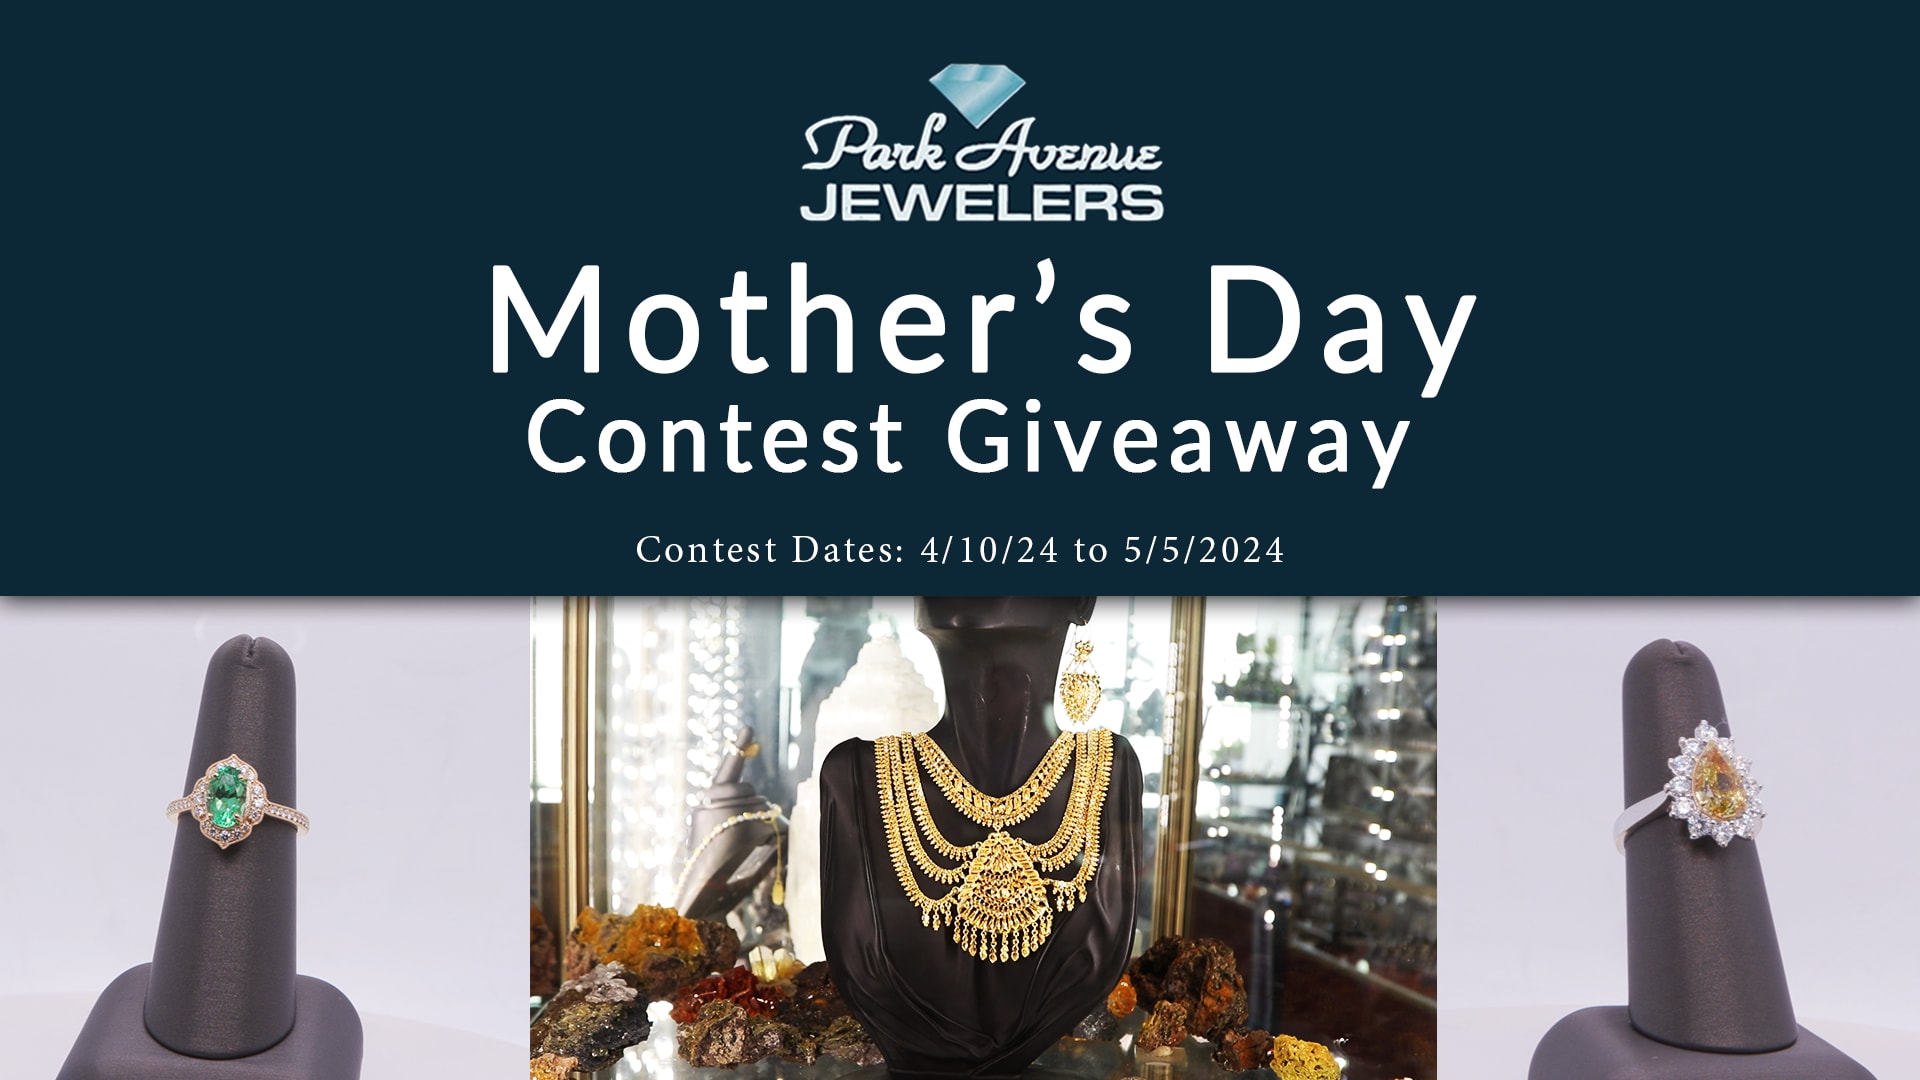 Park Avenue Jewelers - Mother's Day Contest